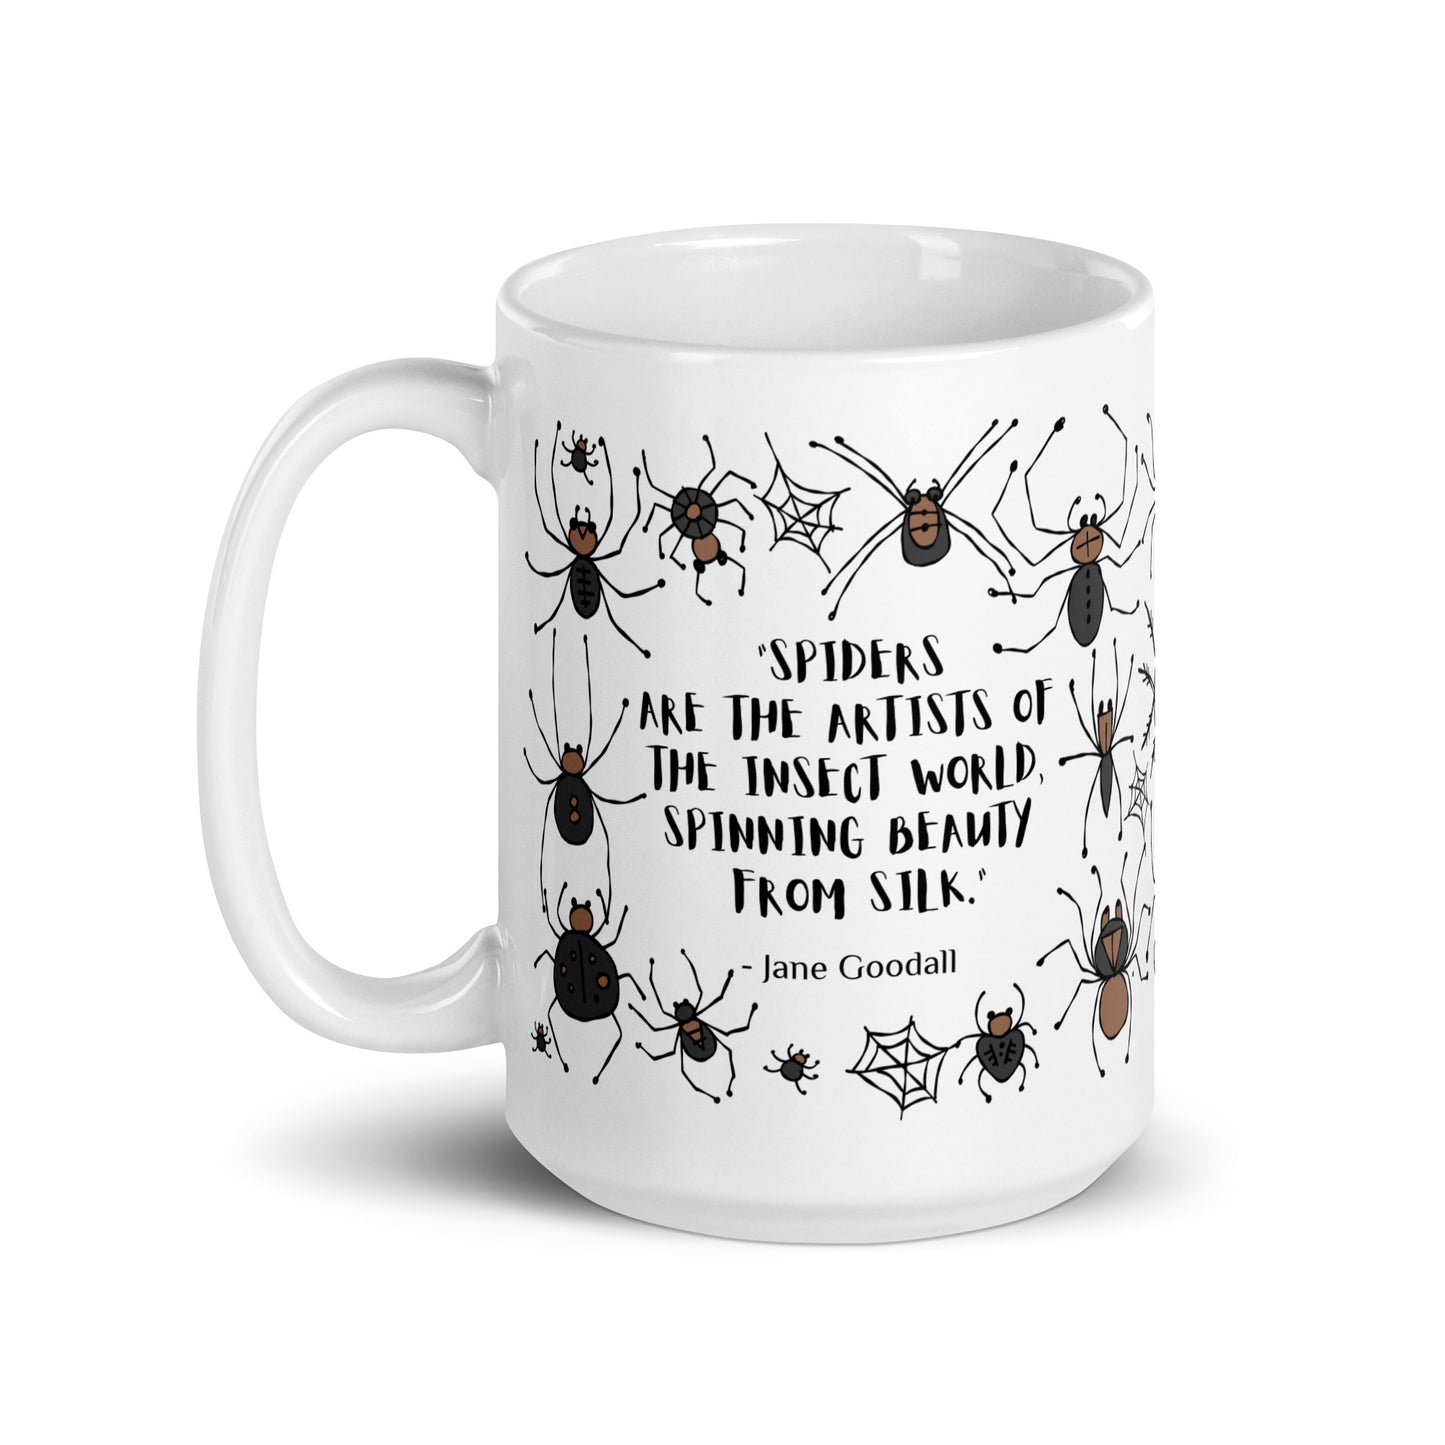 Personalised Ceramic mug 15oz spiders for Arachnologist. Quote on mug: "Spiders are the artists of the insect world, spinning beauty from silk." - Jane Goodall